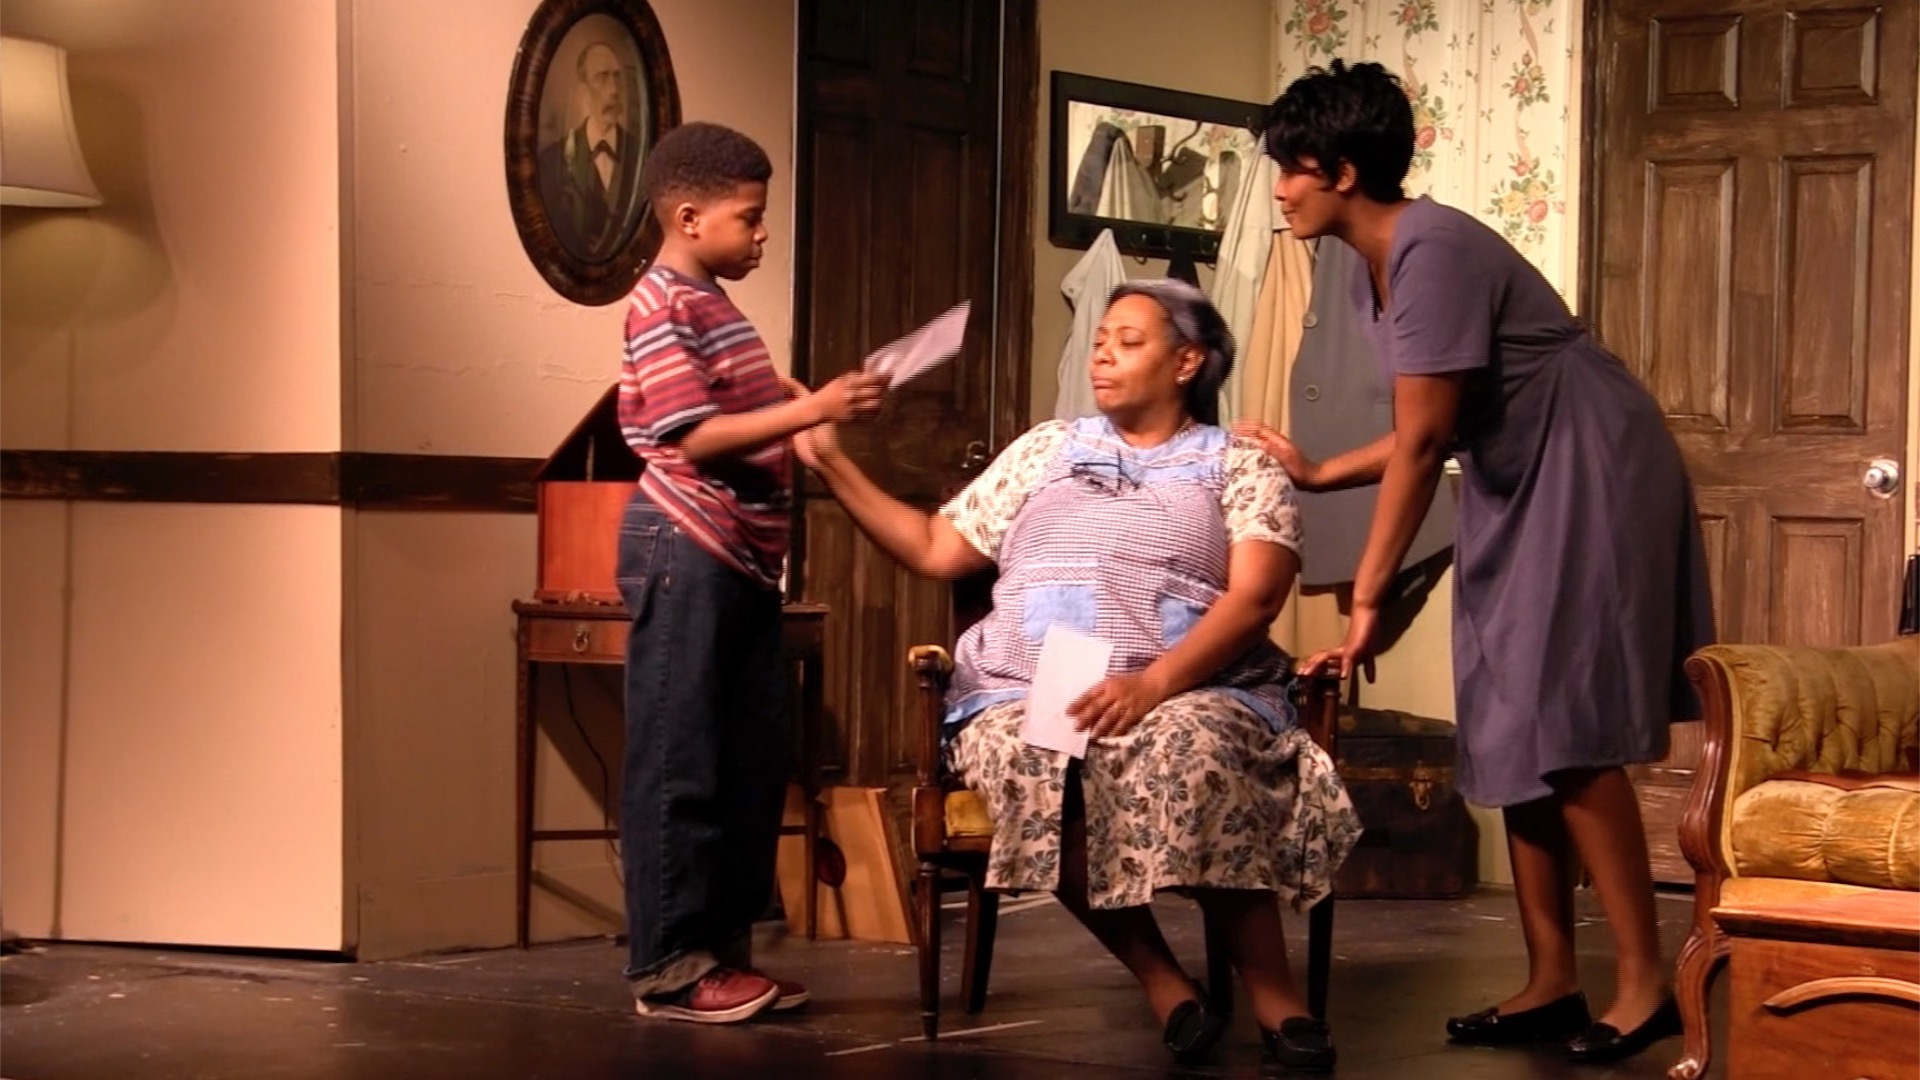 A Play on Poverty and Prejudice